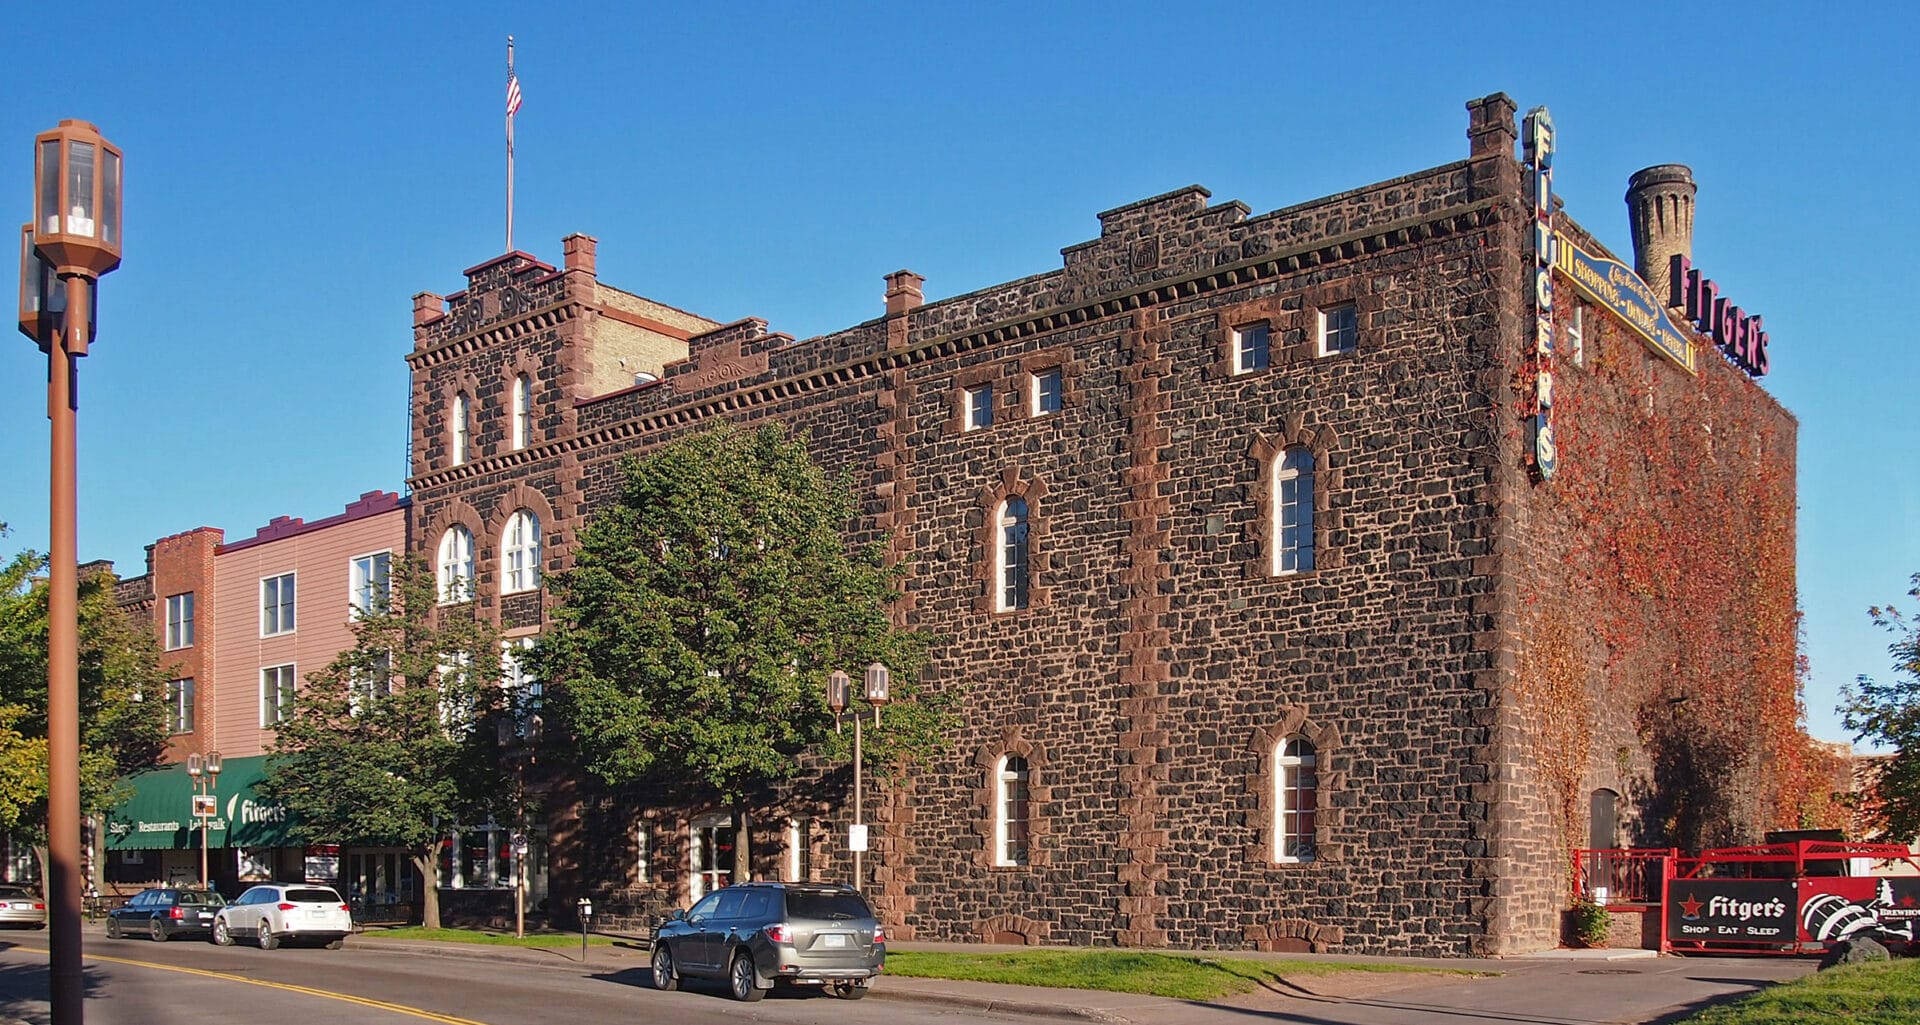 a castle-like red brick building against a blue sky